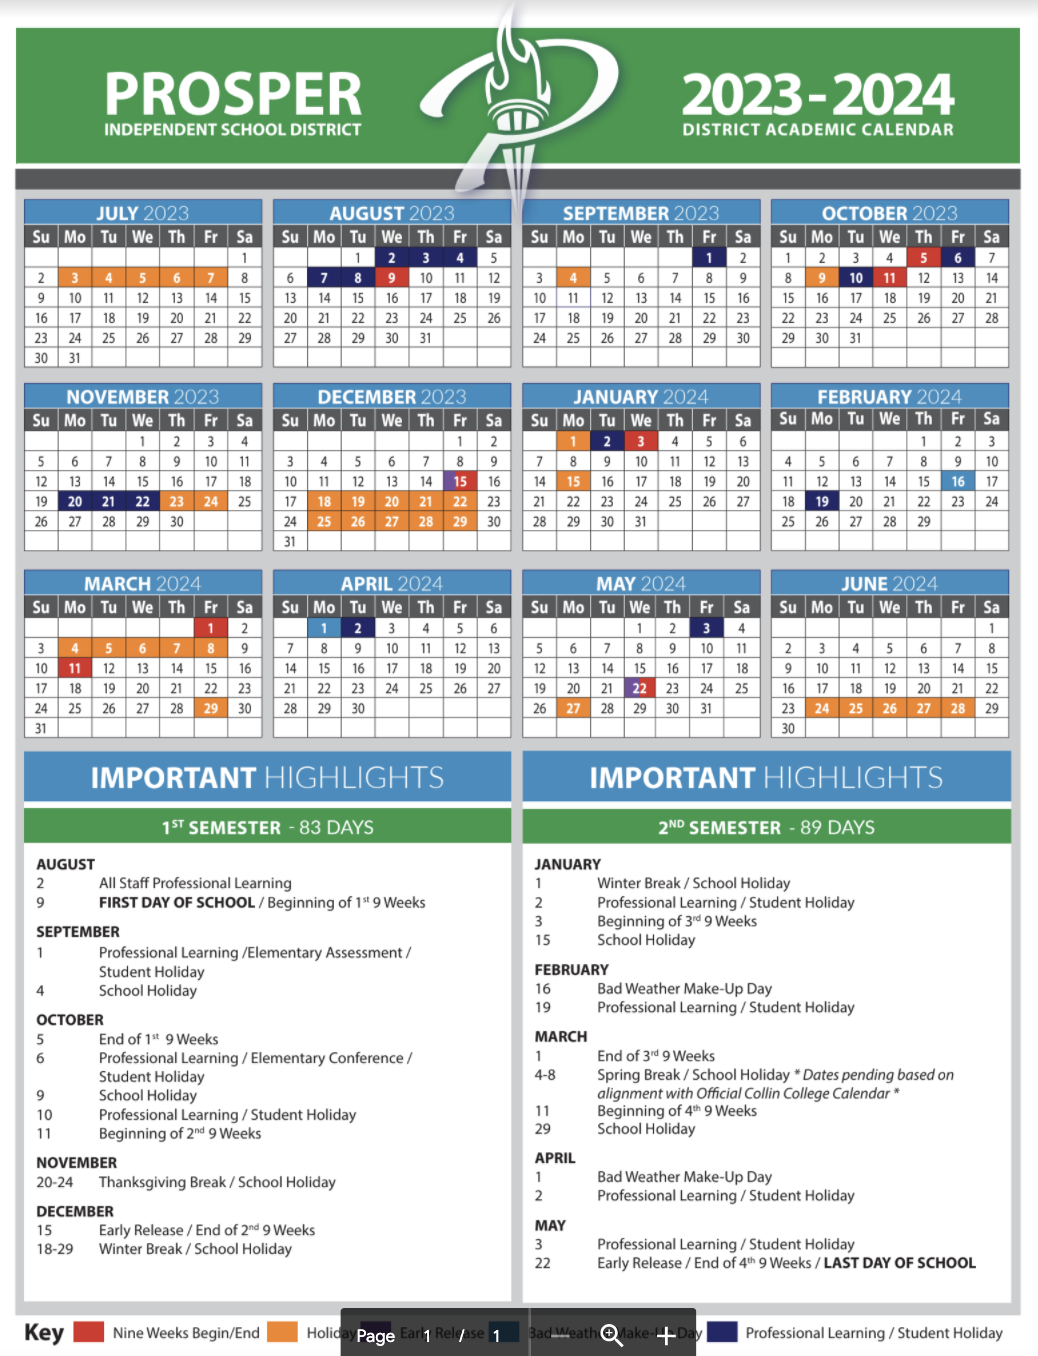 Frisco Isd 2022 2023 Calendar Here Are Prosper Isd's School Calendars For The 2022-2023 And The 2023-2024  School Years | Cities | Checkoutdfw.com